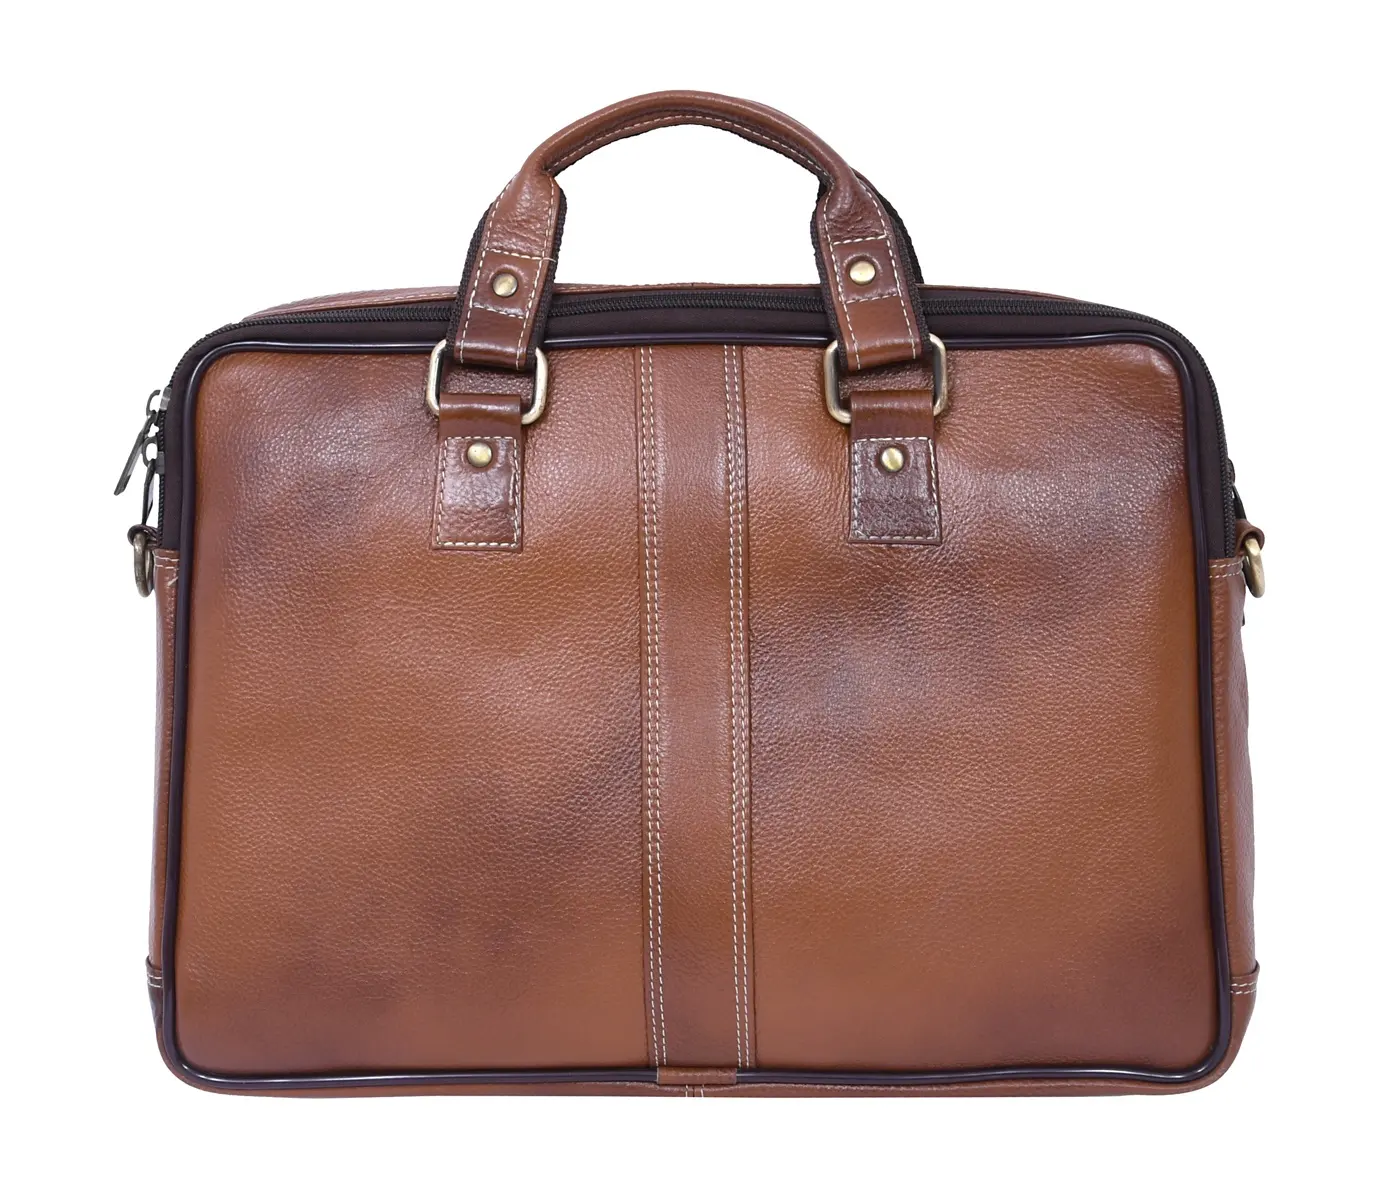 LEATHER LAPTOP CARRY BAG FOR MEN GENUINE LEATHER MATERIAL WITH DETACHABLE SHOULDER STRAPS & WRIST HANDLE